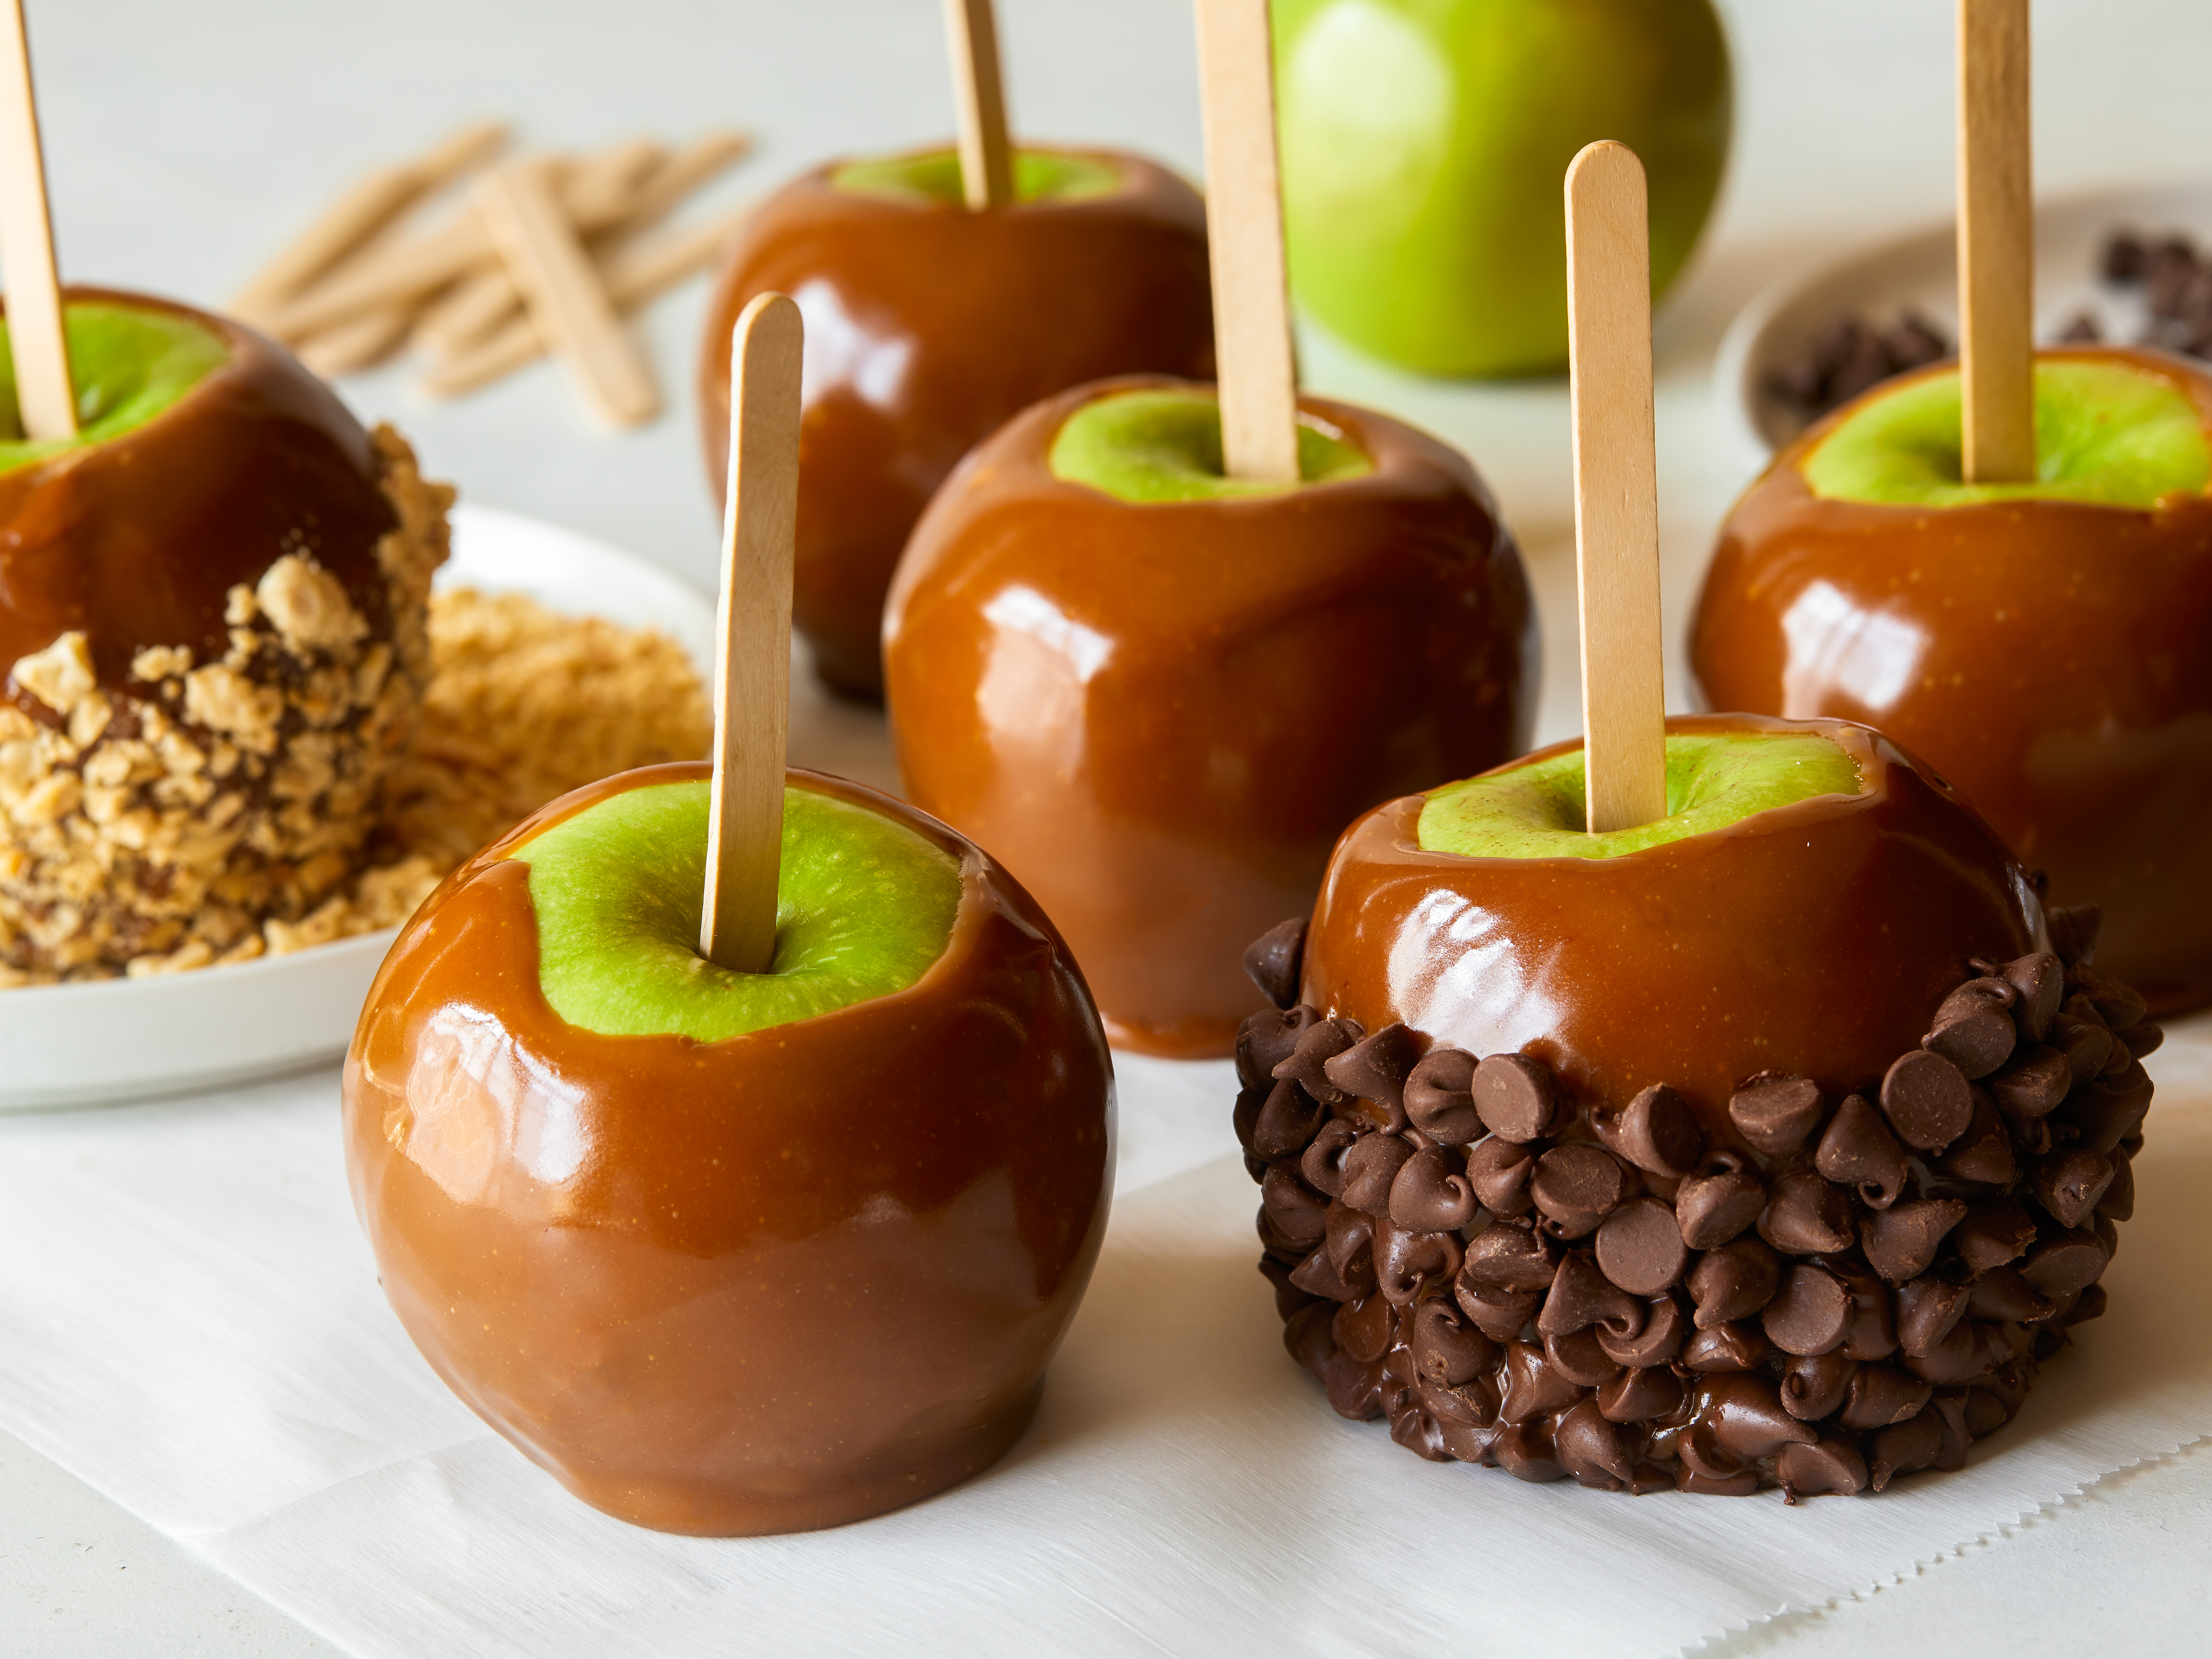 Best Candy Apples Recipe - How To Make Homemade Candy Apples